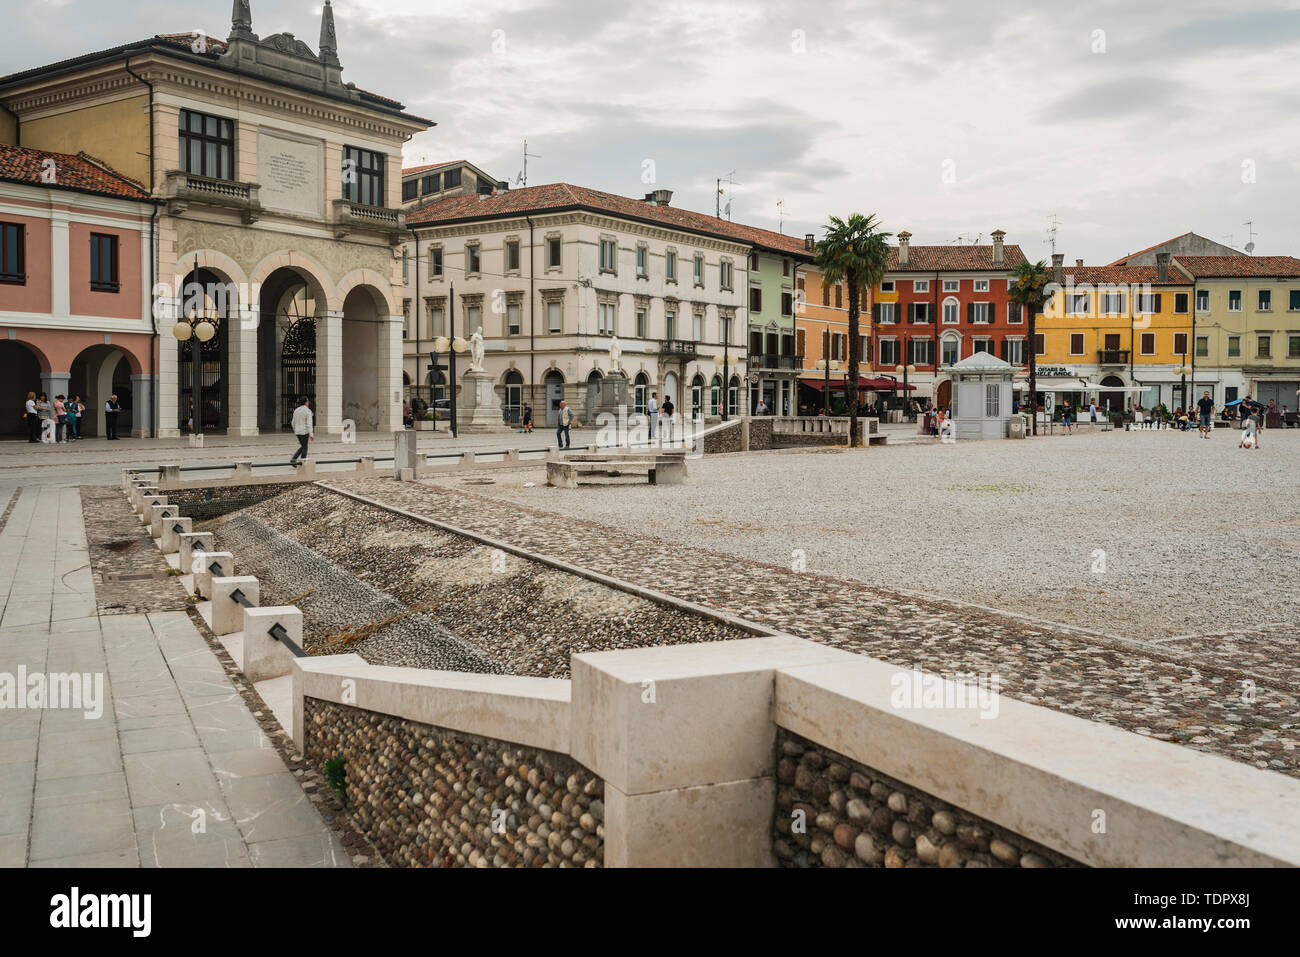 Renaissance architecture and city life in a town square; Palmanova, Italy Stock Photo